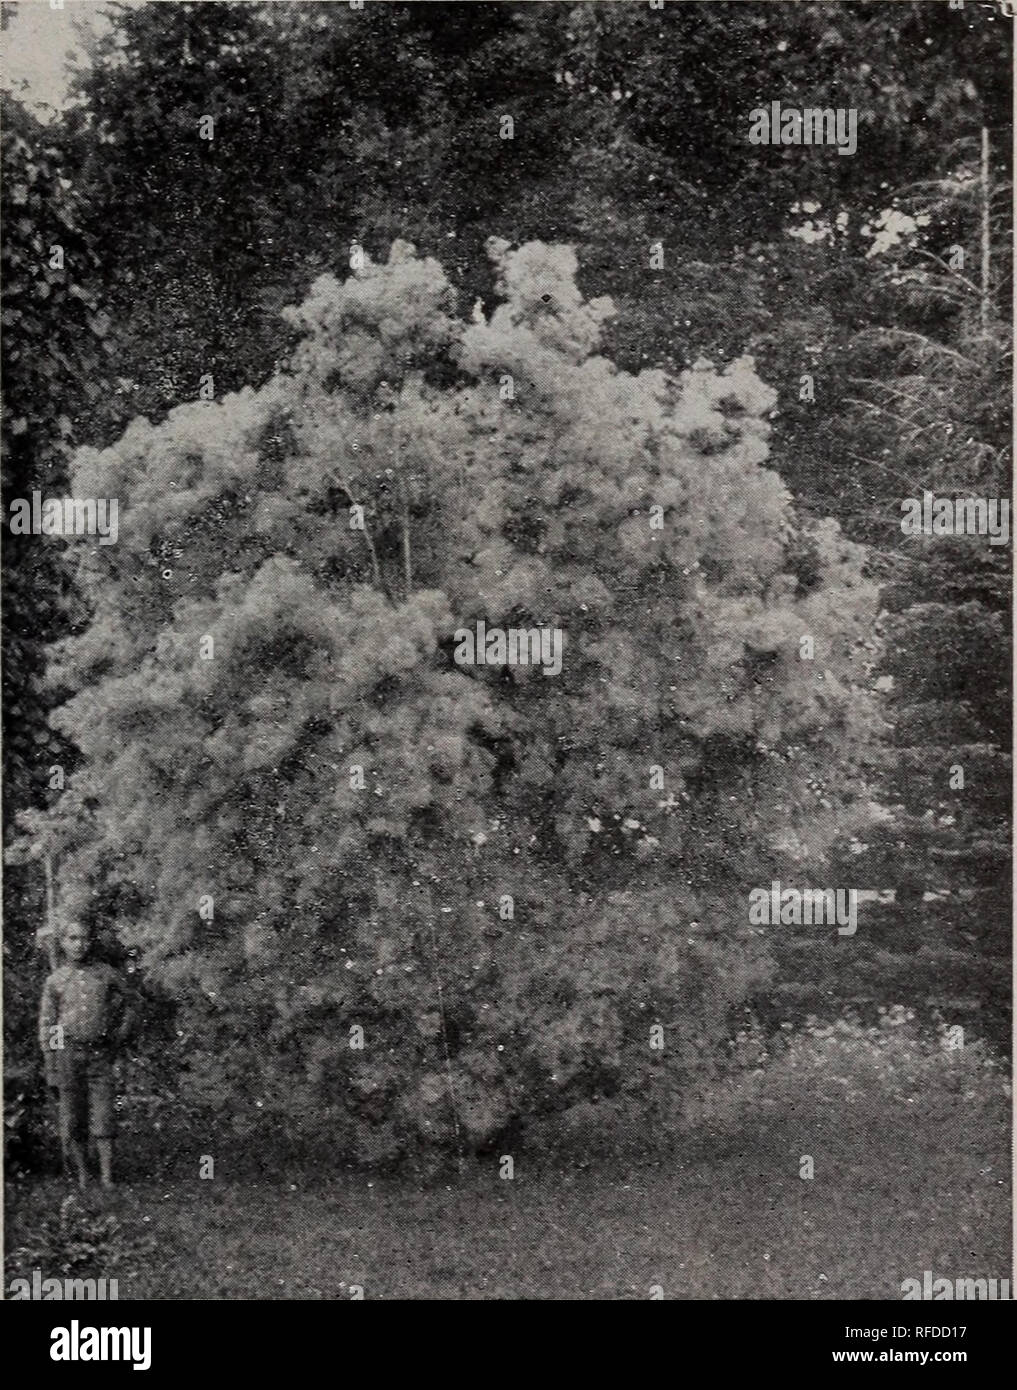 . General catalogue : fruit &amp; ornamental trees, shrubs, roses. Nursery stock New York (State) Geneva Catalogs; Fruit trees Seedlings Catalogs; Fruit Catalogs; Plants, Ornamental Catalogs; Trees Seedlings Catalogs; Shrubs Catalogs; Flowers Catalogs. SHRUBS 63 l^lder (SambucusJ. CUT-LEAVED (Laciniata)—A valuable variety with elegantly divided leaves ; one of the best cut-leaved shrubs. CUT-LEAVED GOLDEN (Laciniata aurea)—New. A beautiful cut-leaved shrub, with bright golden yellow foliage crowned on the tips of branches with a glowing bronze. (See cut.) GOLDEN (Aurea)—A handsome variety with Stock Photo